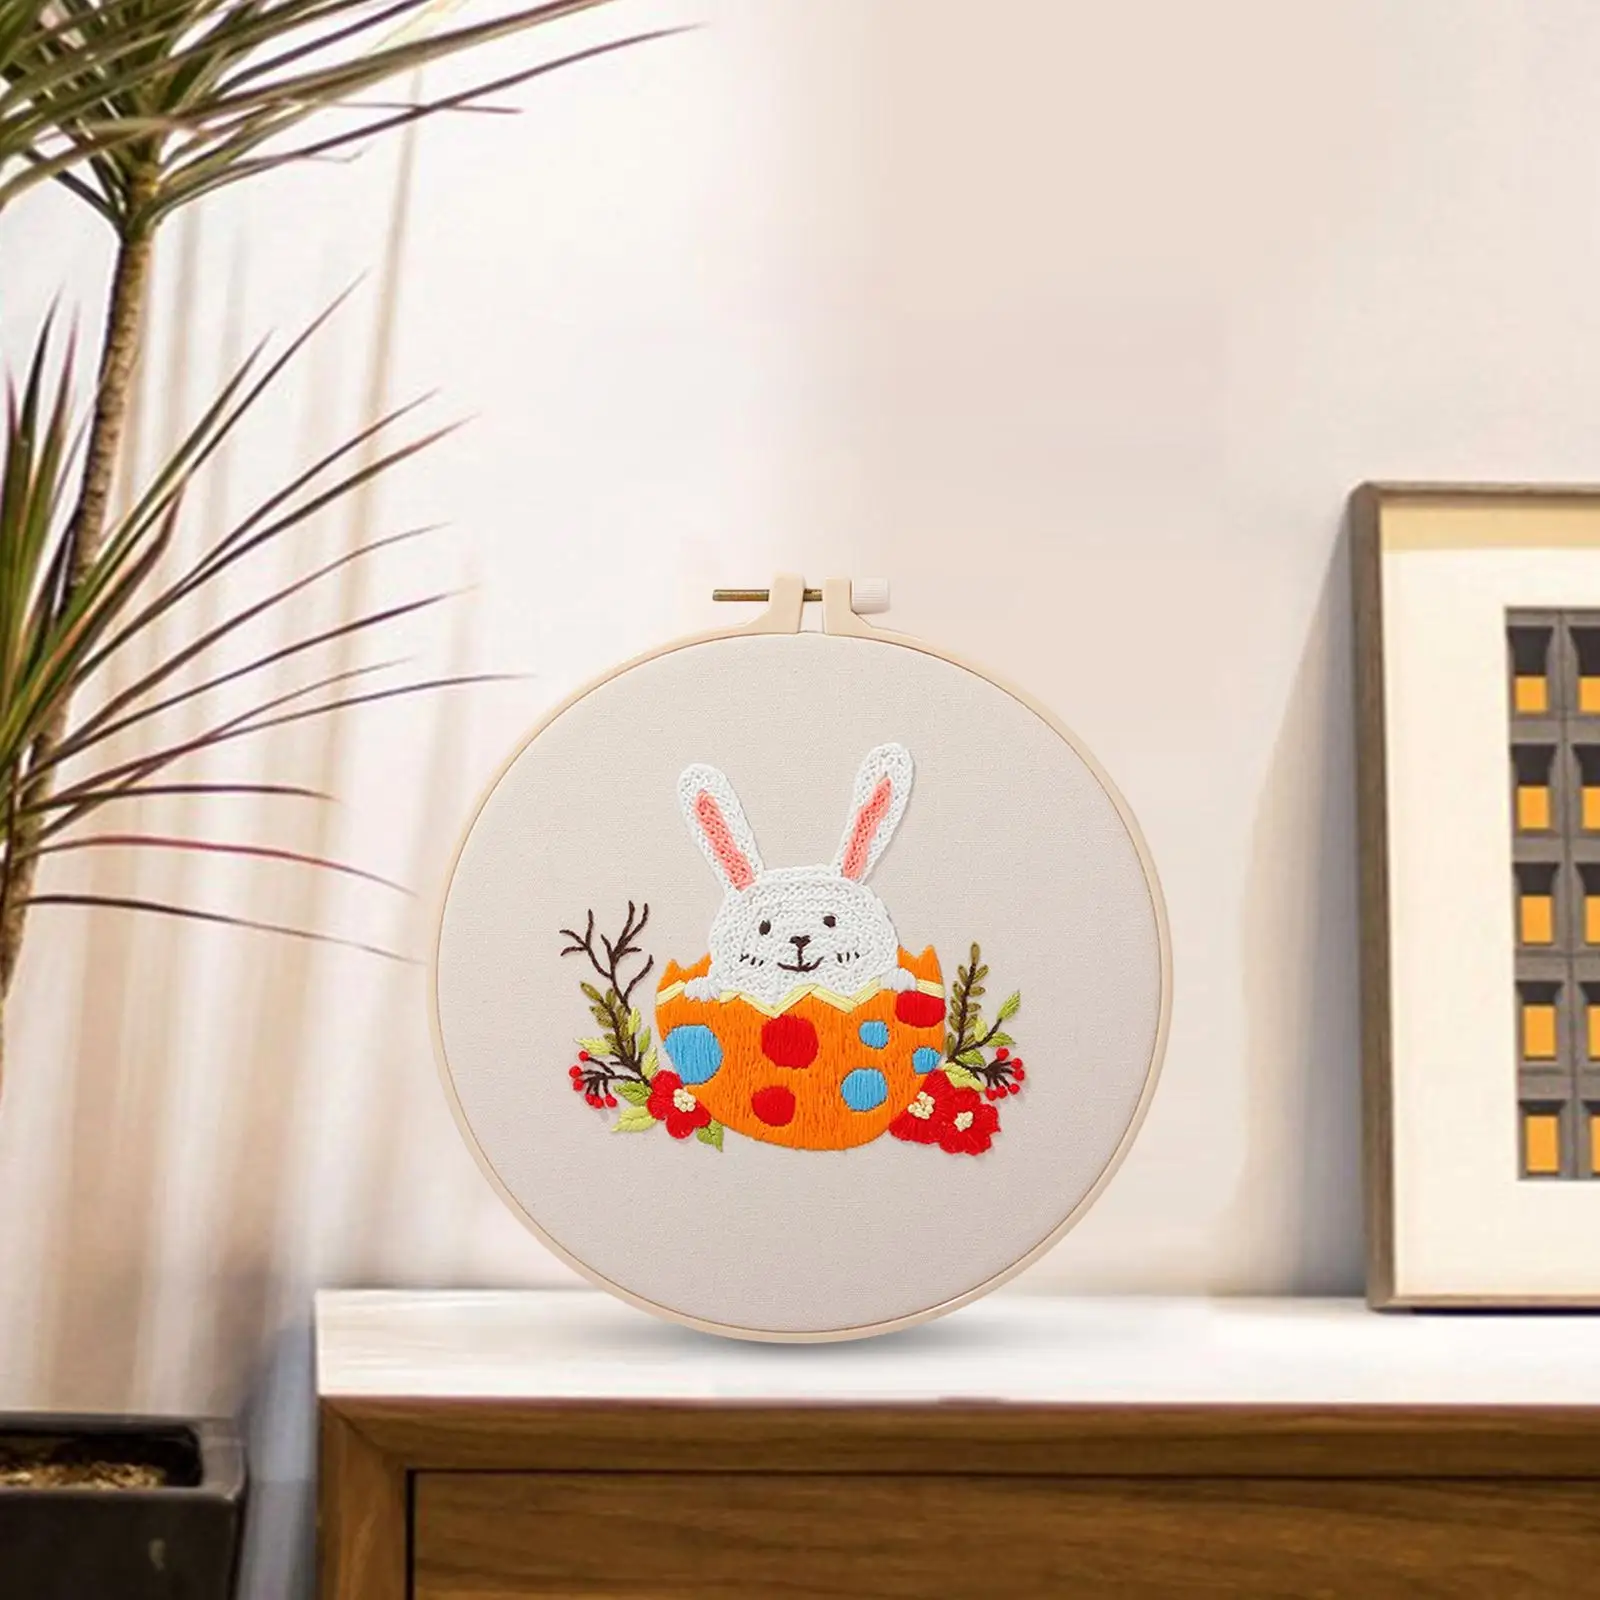 Rabbit Embroidery Starter, with Embroidery Hoop Beginners Sewing Cross Stitch Needlework Crafts for Home Decor